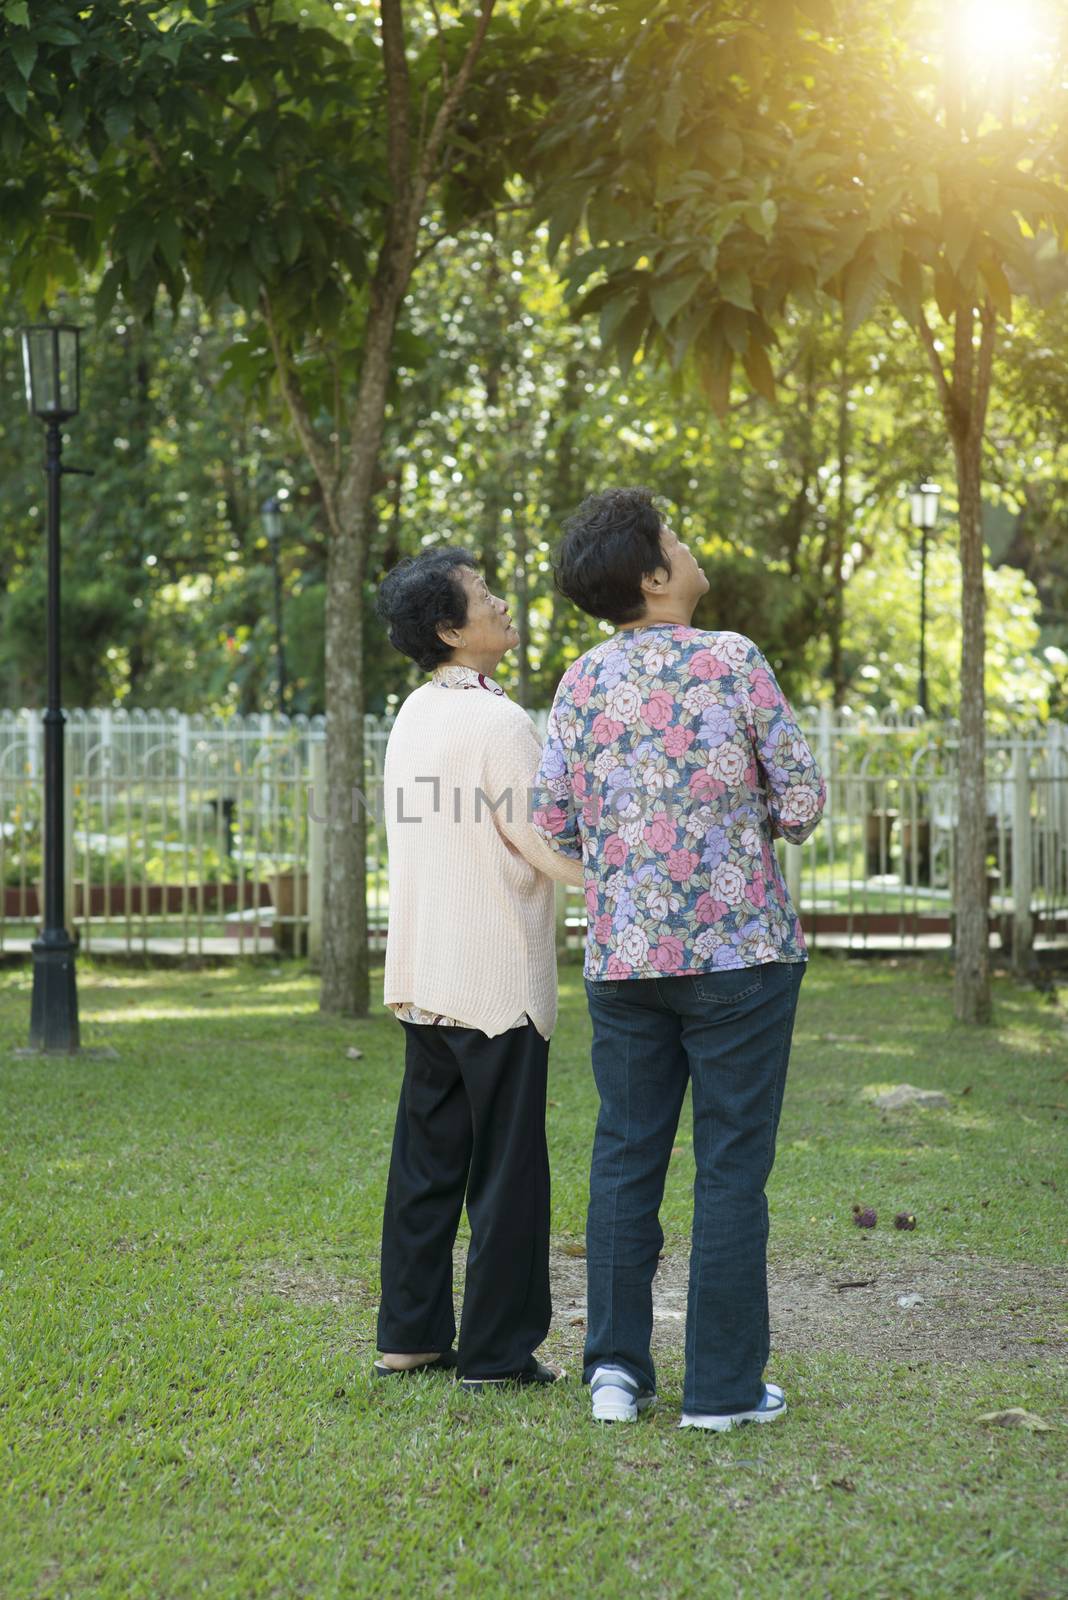 Candid shot of rear view Asian elderly women holding hands and walking at outdoor park in the morning.